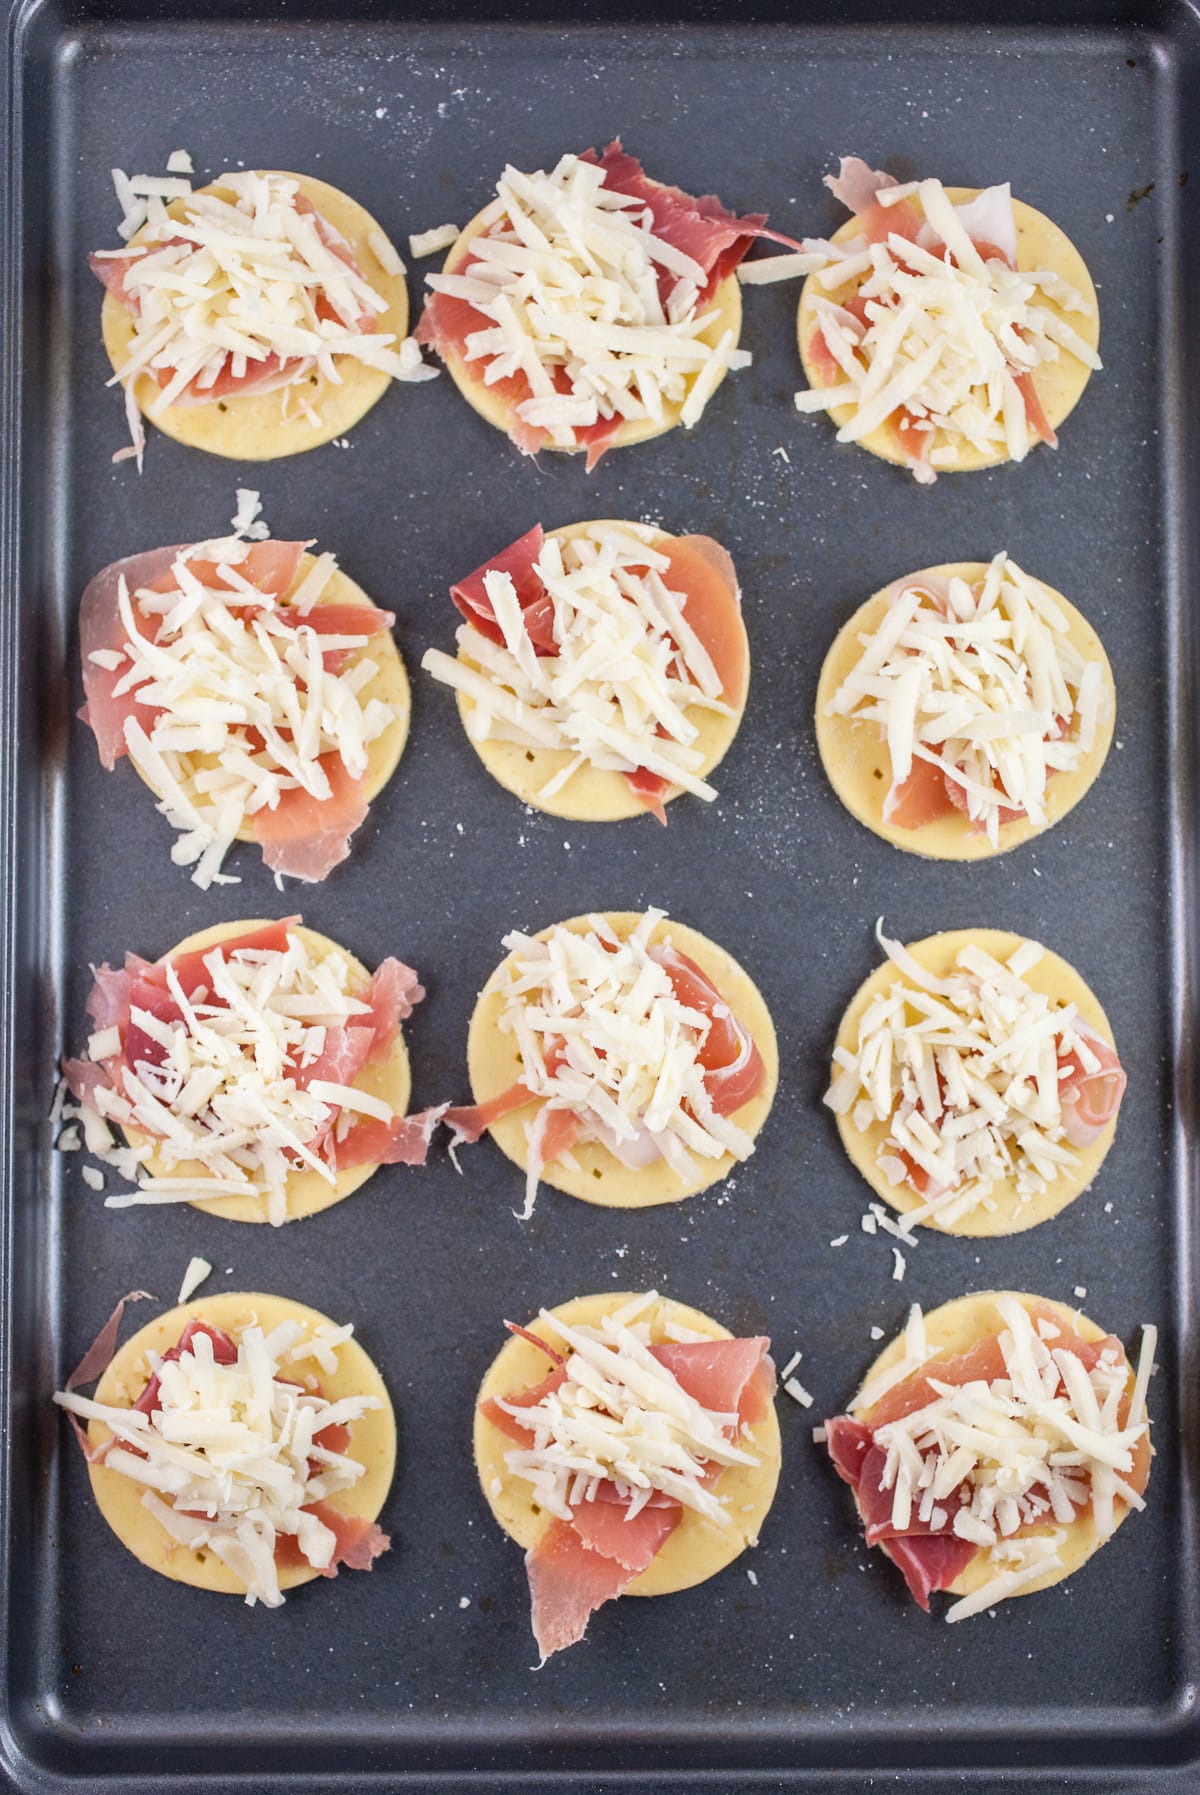 Puff pastry rounds with prosciutto and shredded gruyere cheese on baking sheet.